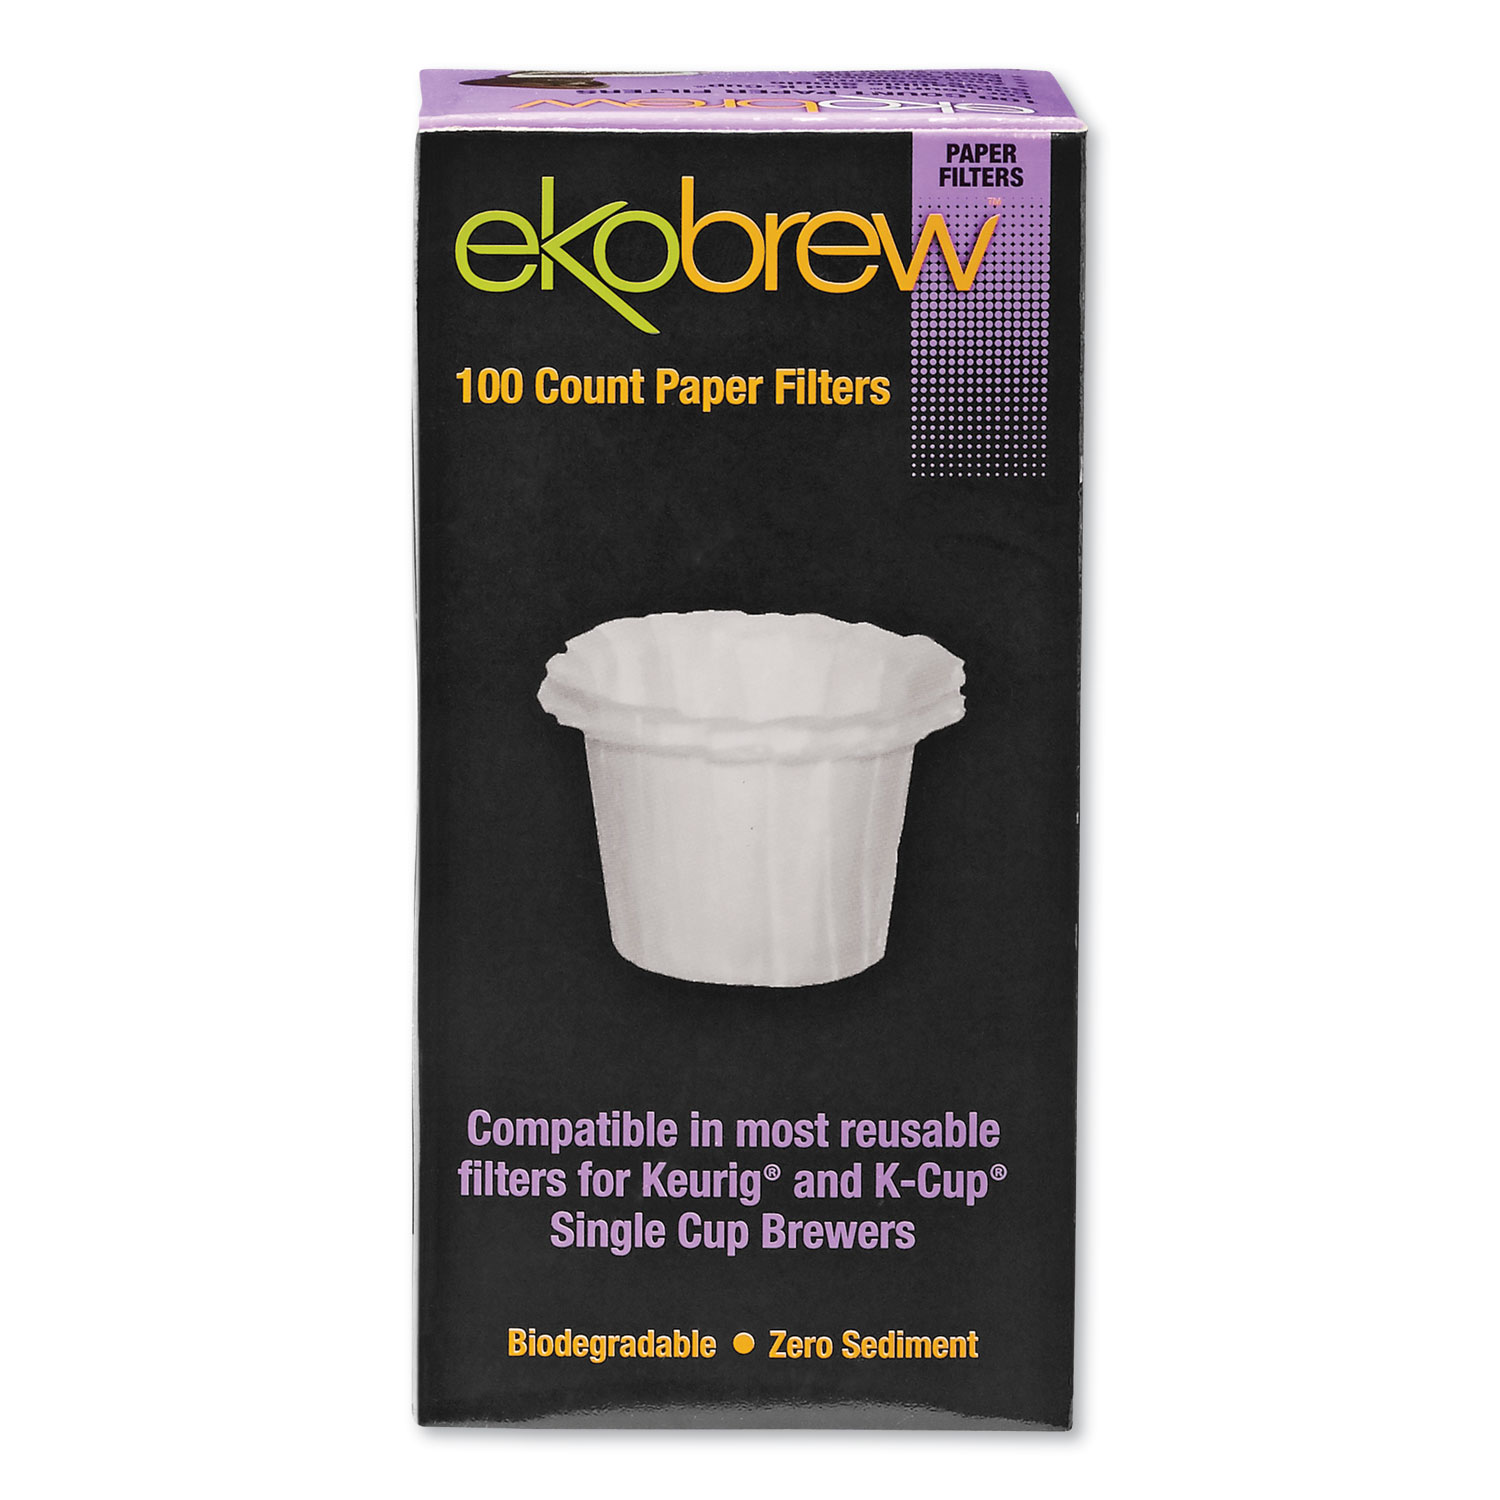 ekobrew™ Paper Filters for Single Cup Brewers, 100/Box